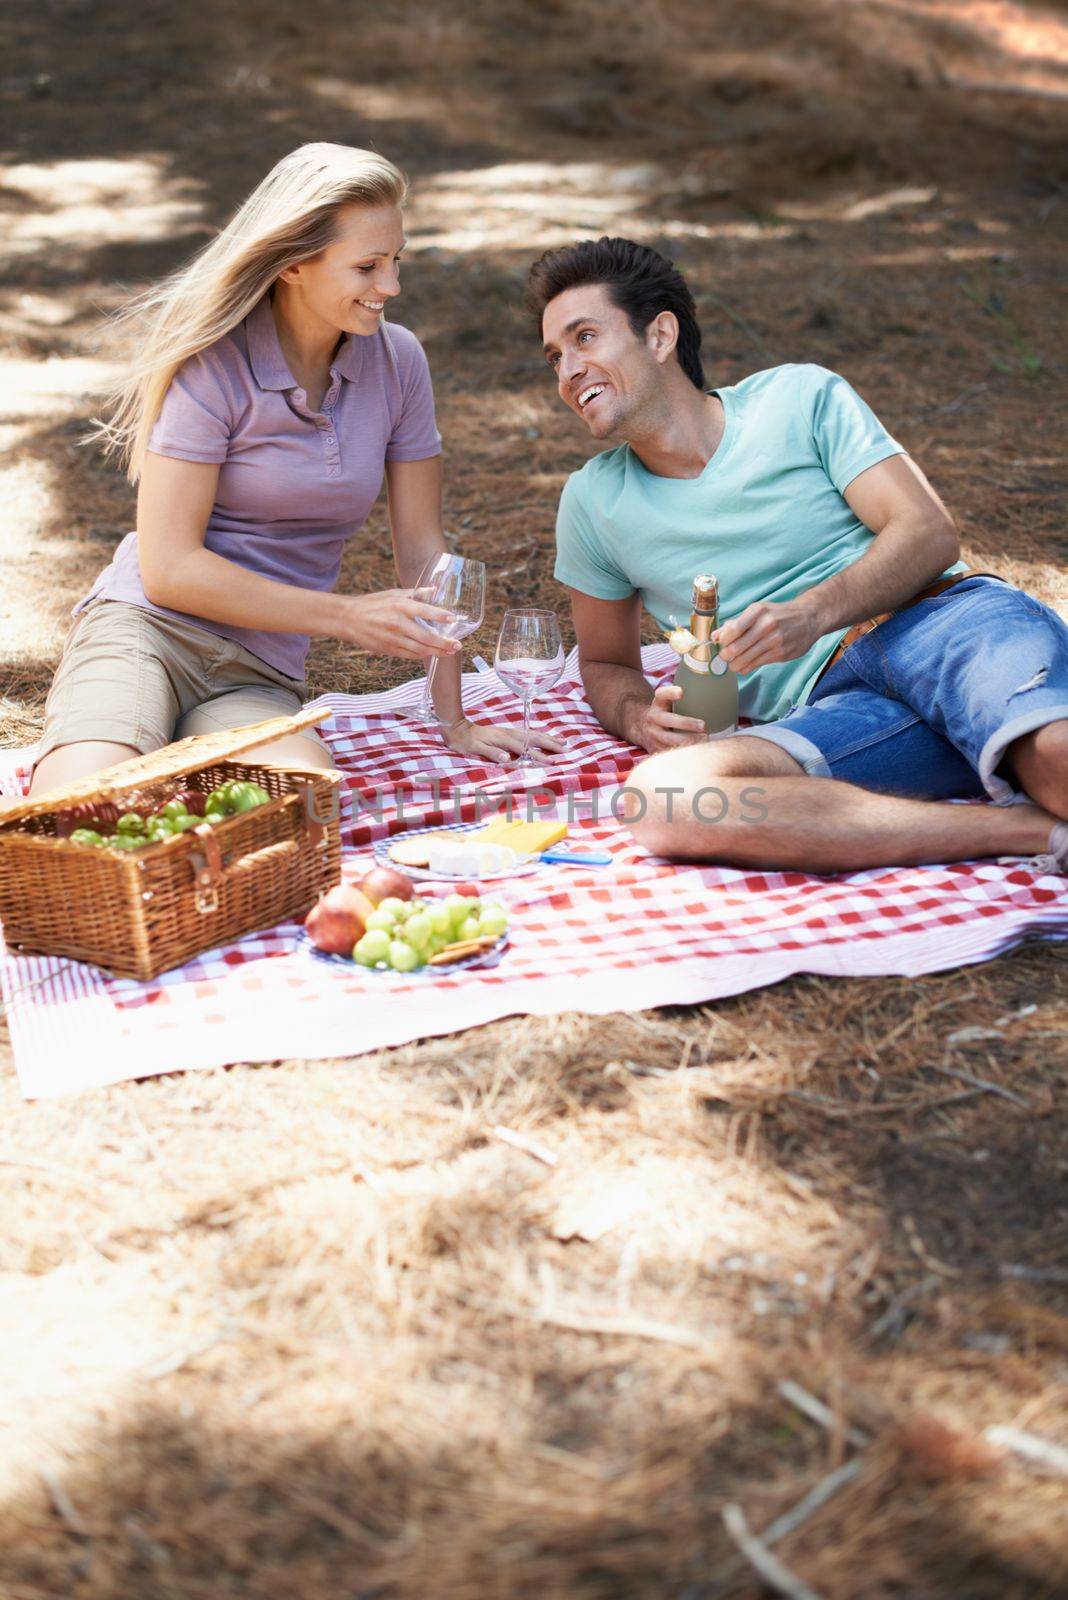 Nothing beats a romantic picnic. View of a happy young couple enjoying a romantic picnic in the woods. by YuriArcurs